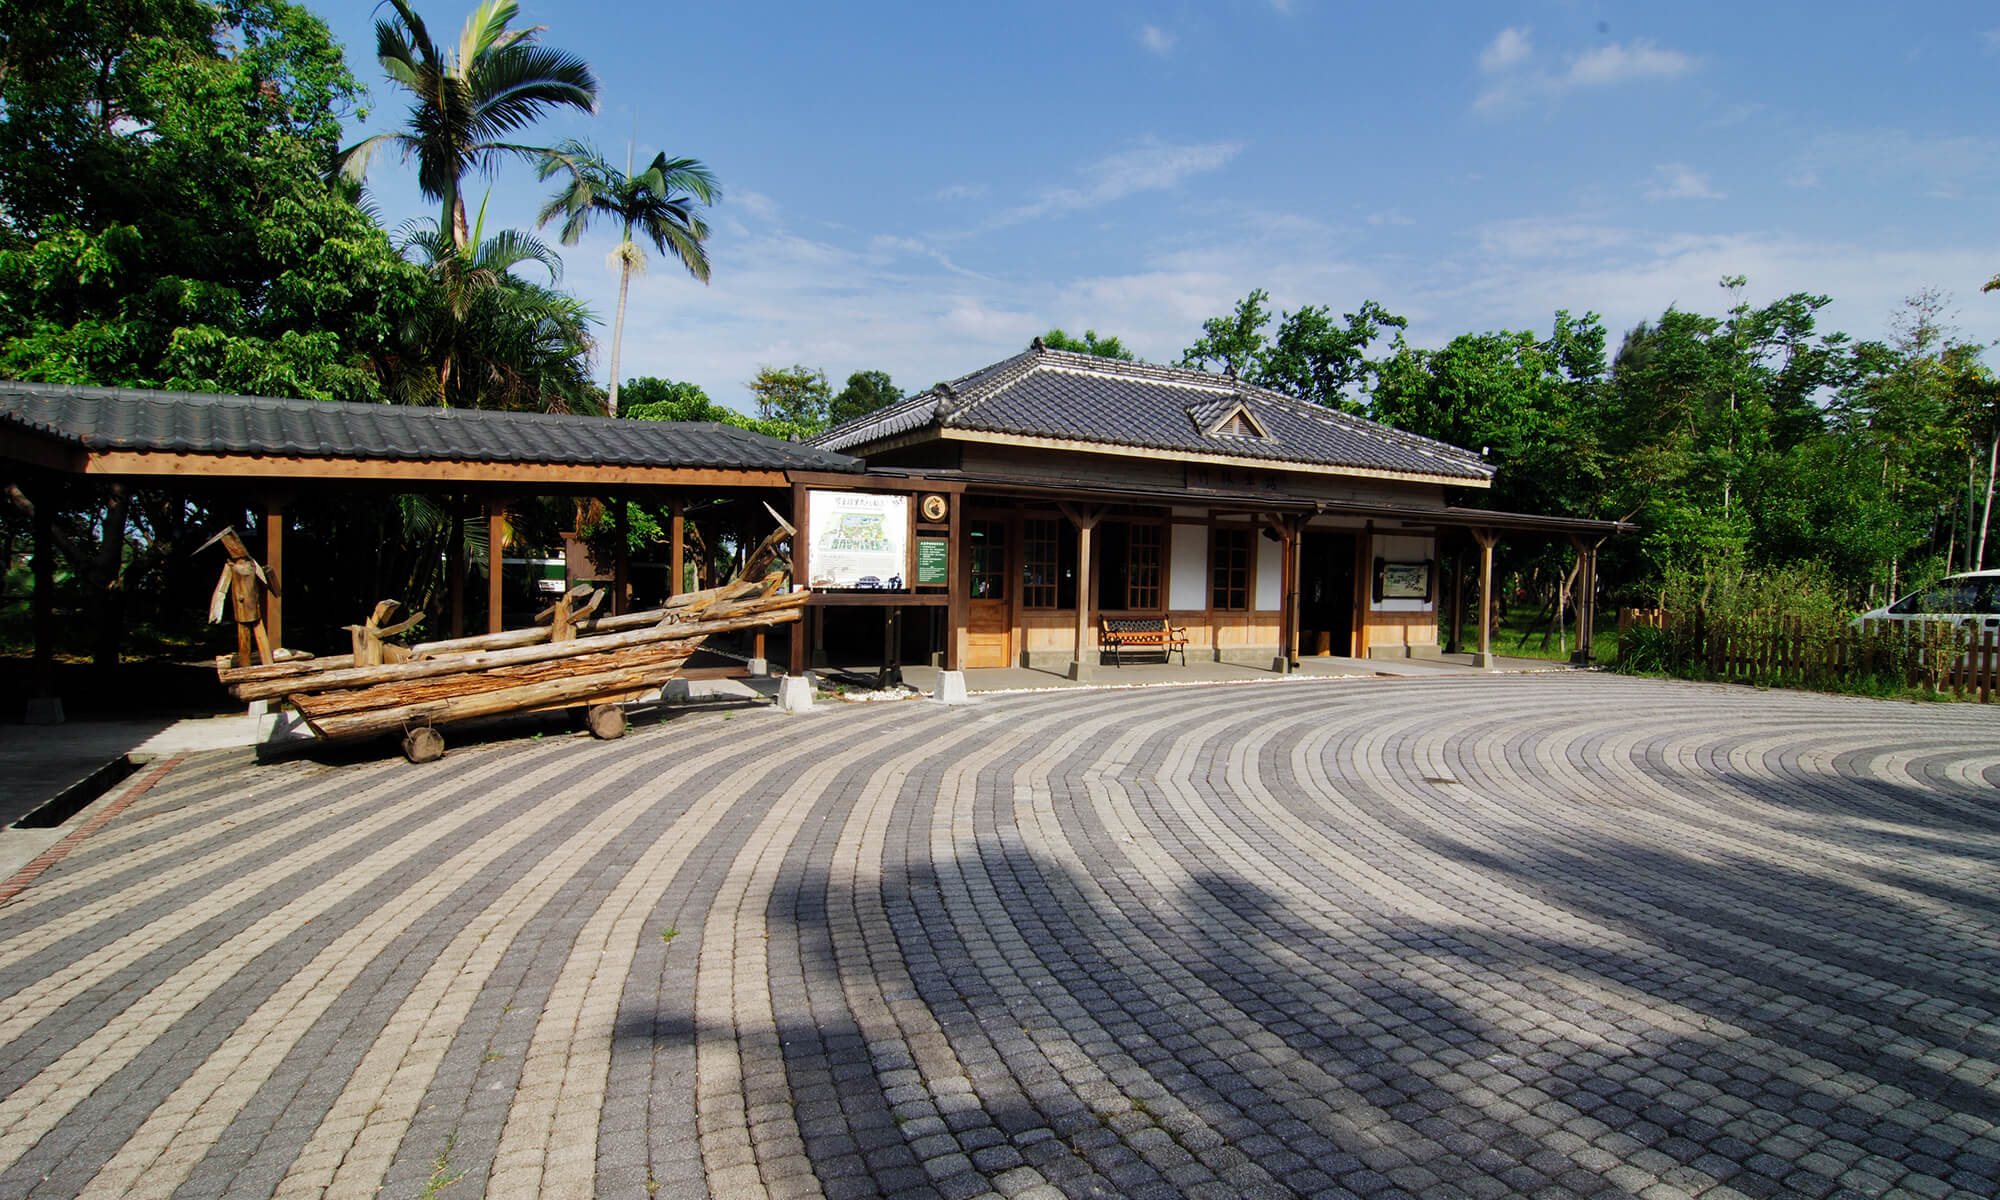 Luodong Forestry Culture Park